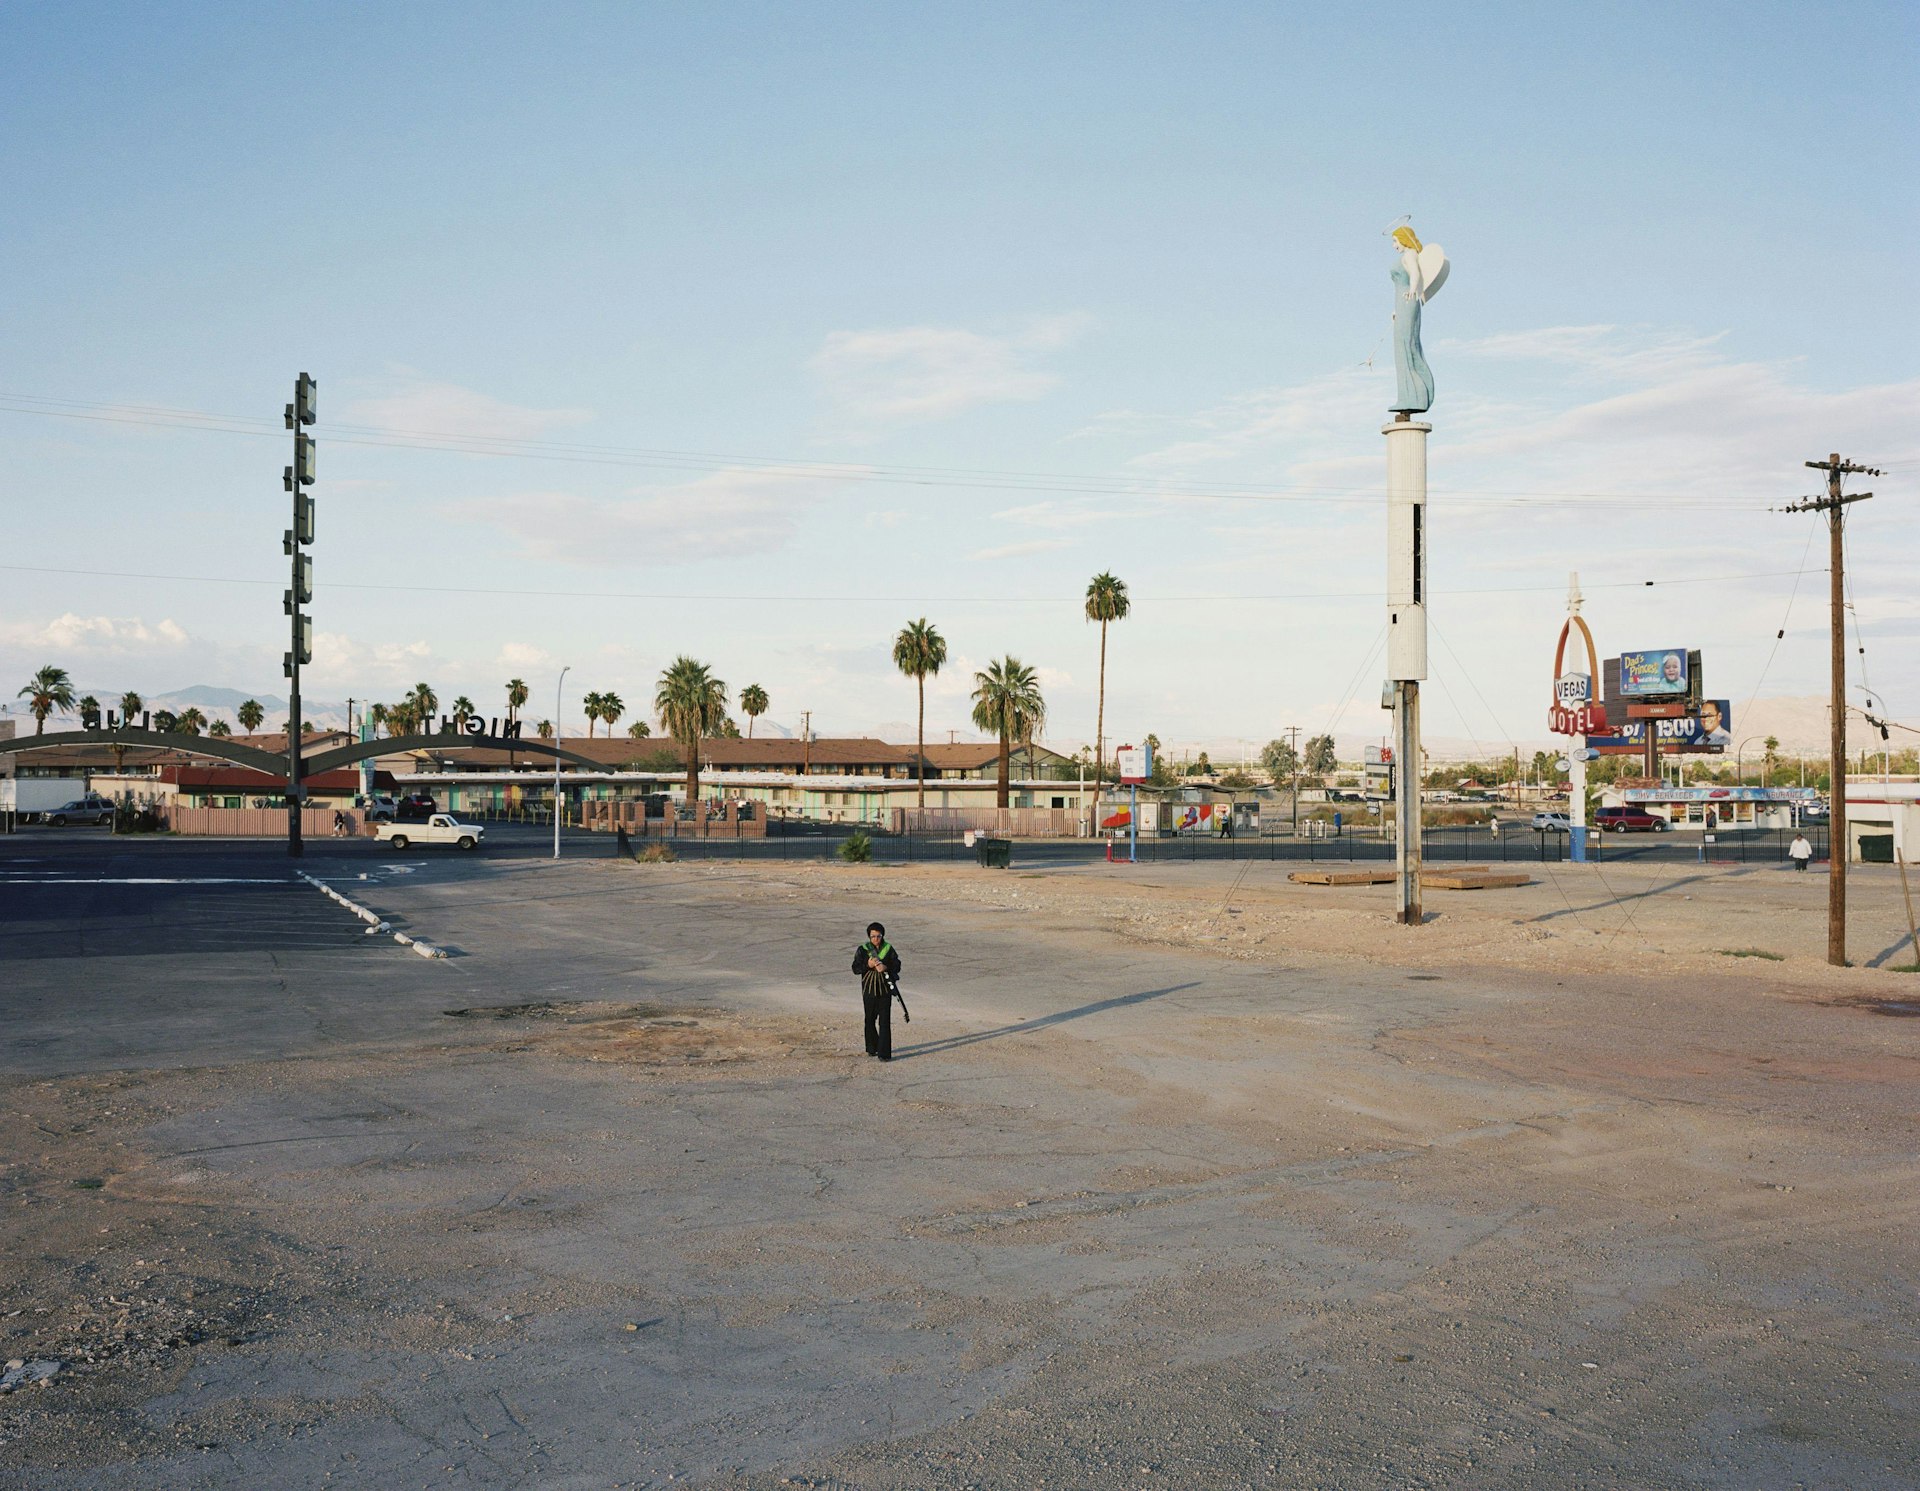 Shooting the Lynchian landscapes of Los Angeles